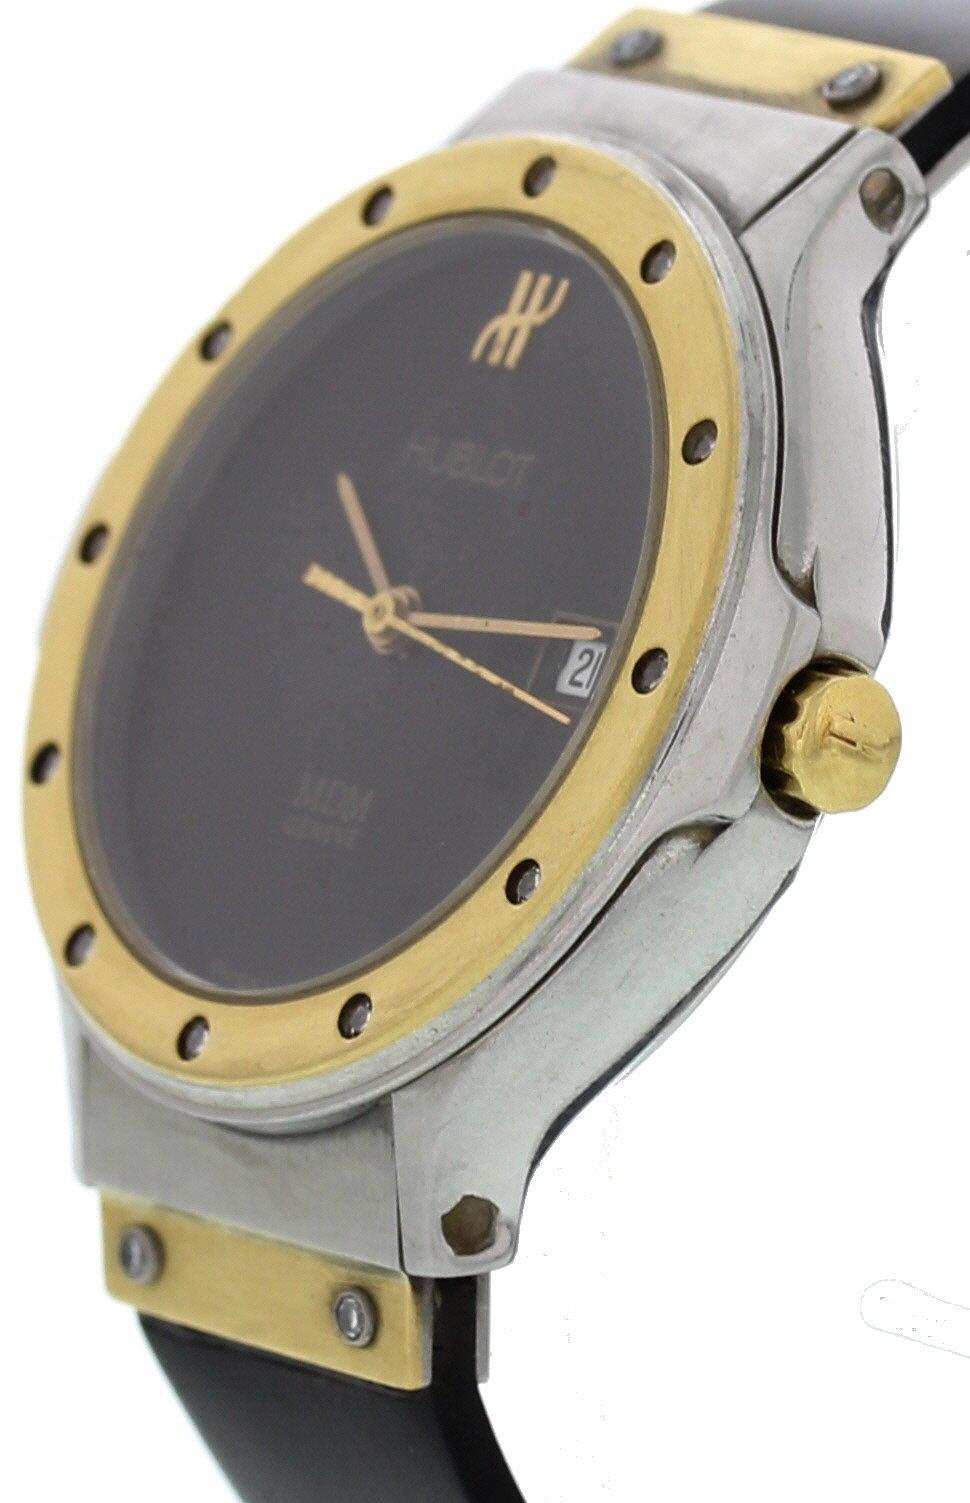 Ladies Hublot MDM. 28 mm stainless steel case. 18k yellow gold bezel and lugs. Black dial with gold hands. Date display. Black rubber strap with stainless steel hidden double folding clasp; will fit up to a 6 inch wrist. Quartz battery movement.